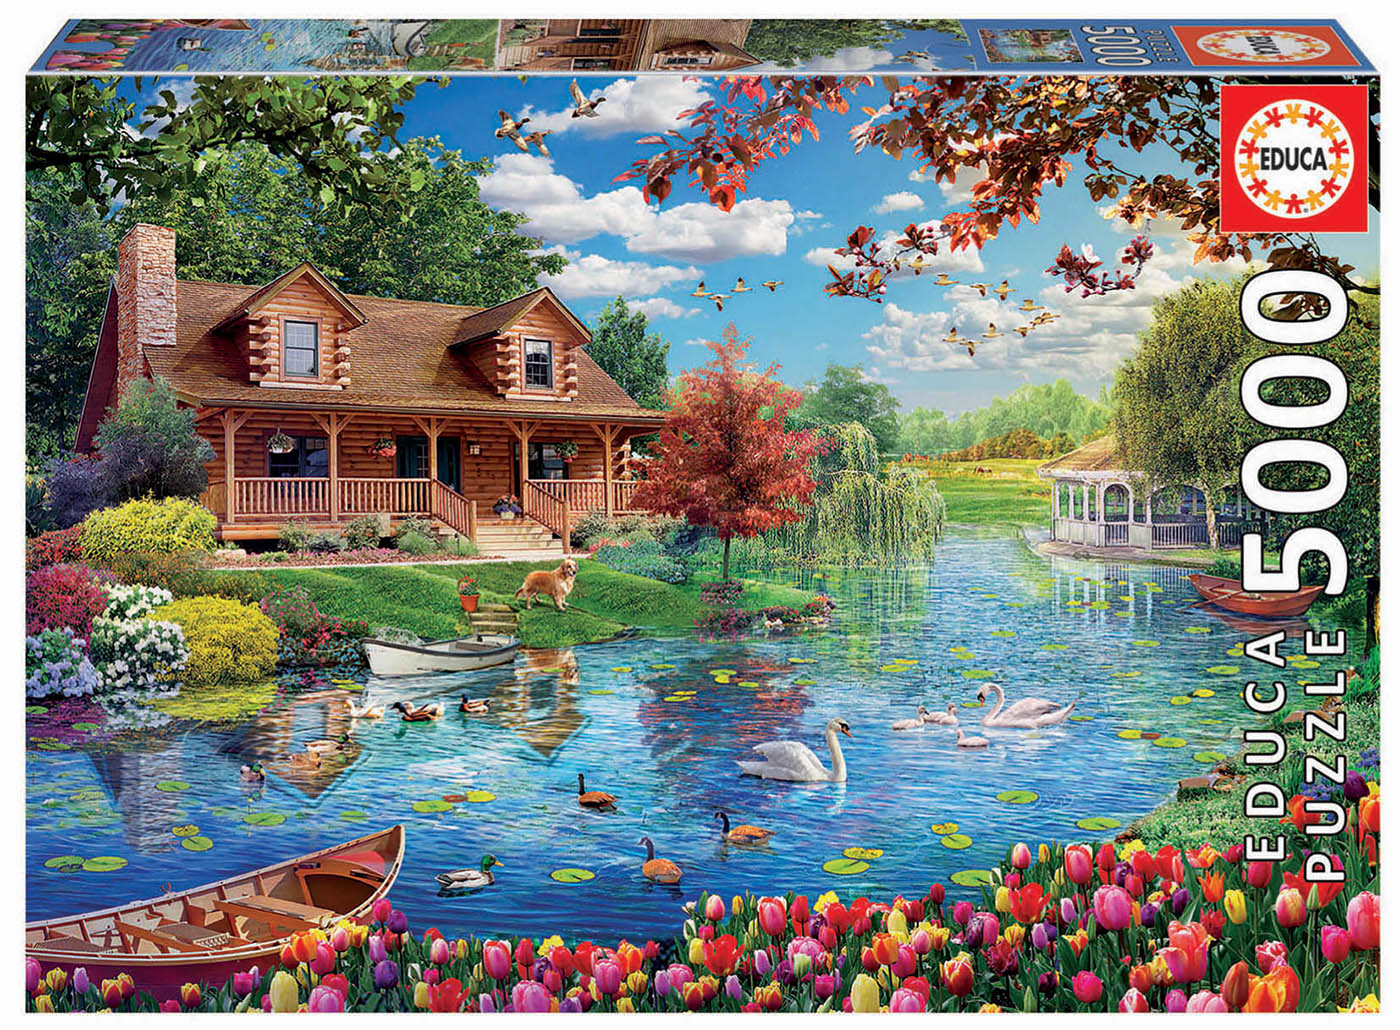 Puzzles for Adults 5000 Preschool Educational and Fun Themes 5000 Piece Large Pieces Jigsaw Puzzle for Adults Art Paintings